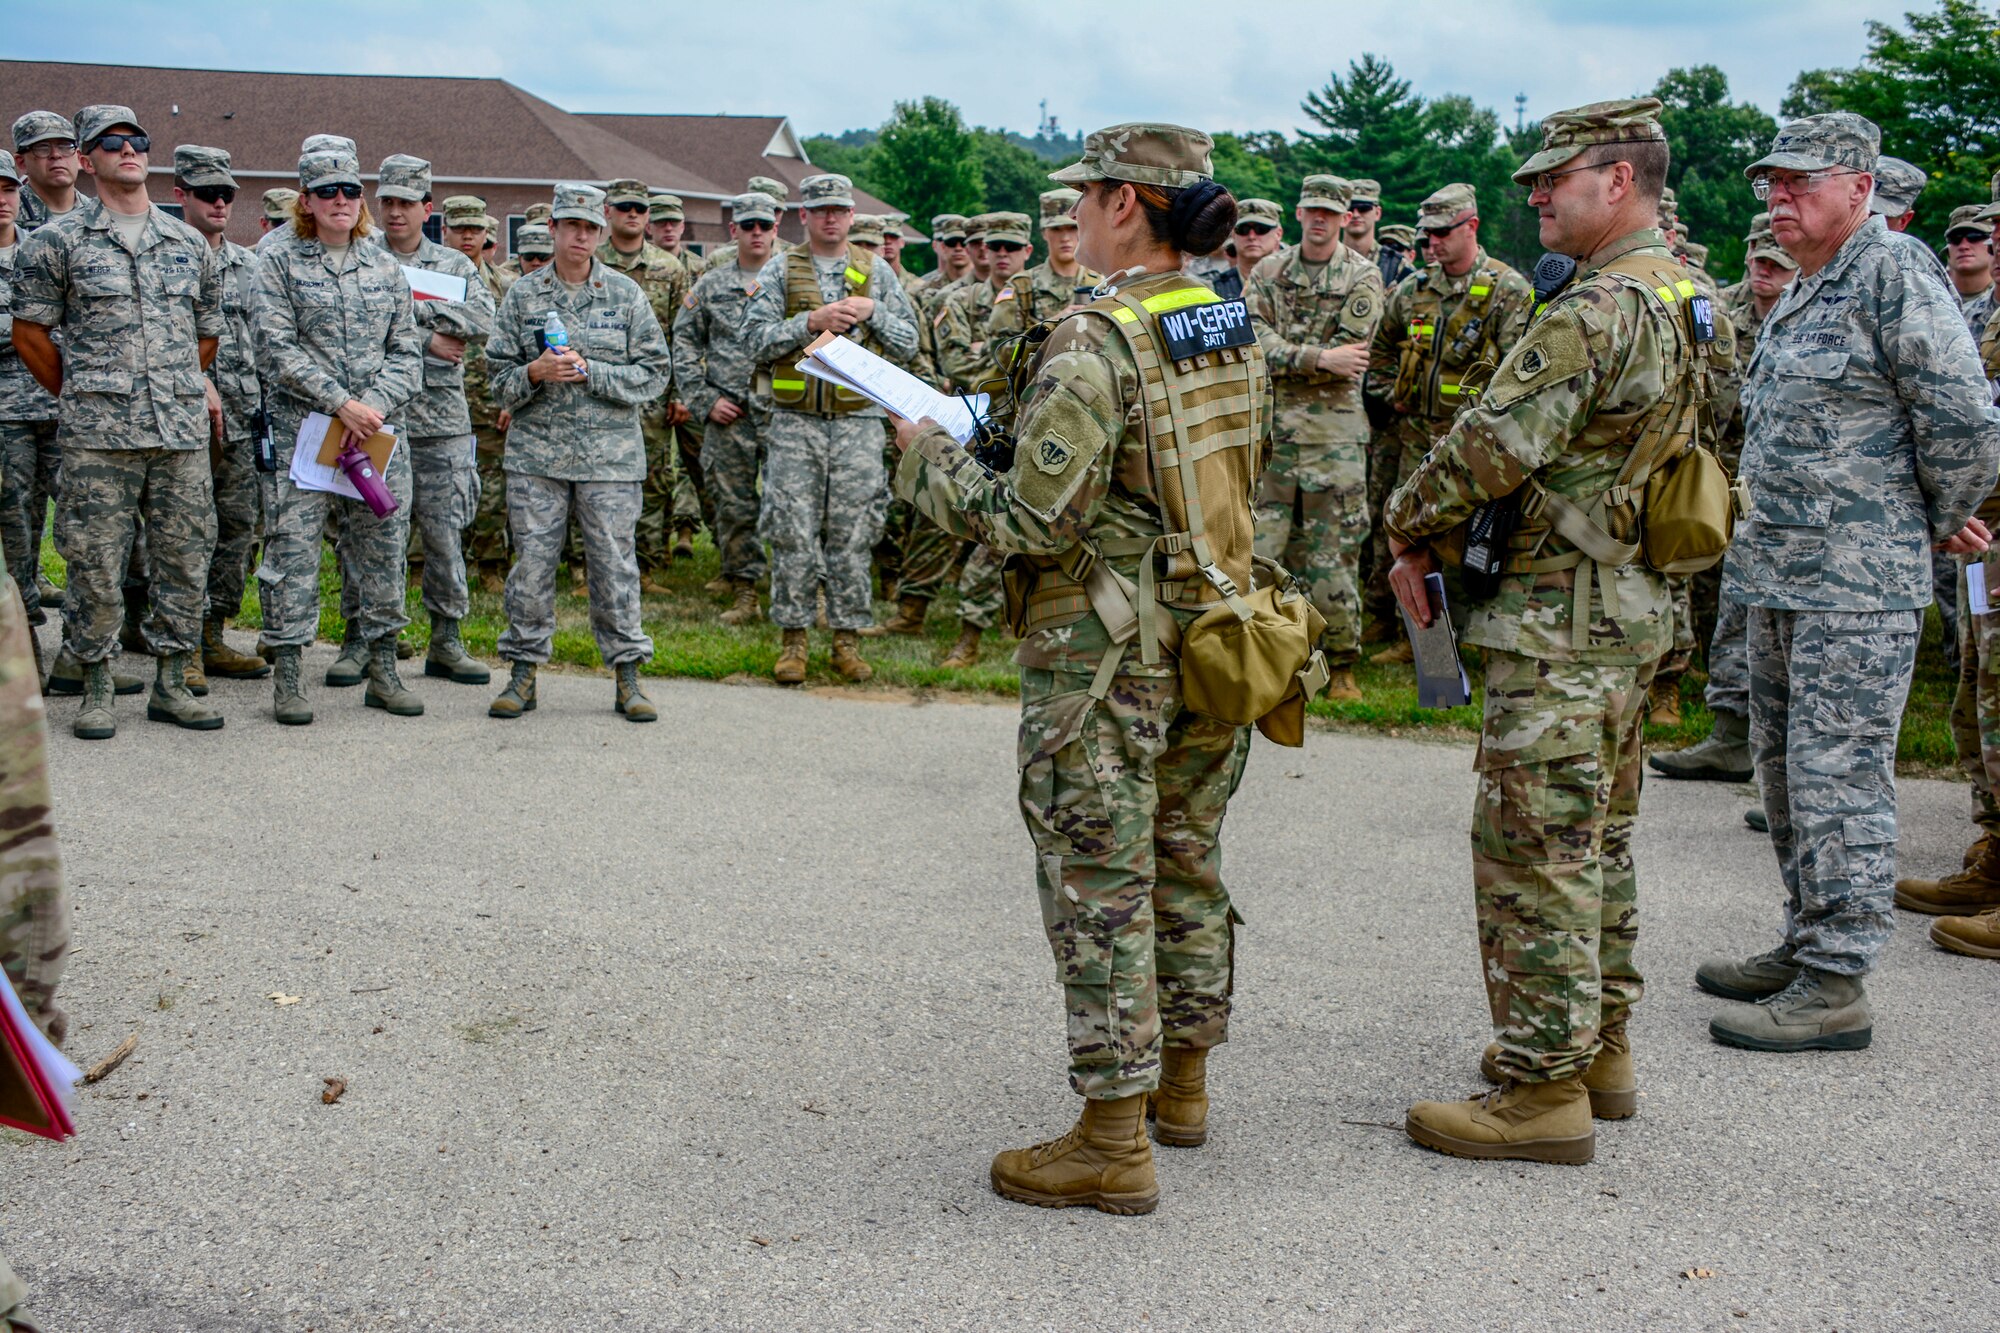 Joint military members with the Wisconsin Chemical, Biological, Radiological, Nuclear and High Yield Explosive Enhanced Response Force Package receive a safety brief prior to their the External Evaluation exercise at Volk Field Air National Guard Base, Aug. 16, 2018. The ExEval is conducted as a way to re-validate the WI CERFP to perform its CBRN Response Enterprise mission in support of the State and Nation.(U.S. Air National Guard photo by Tech. Sgt. Mary E. Greenwood)